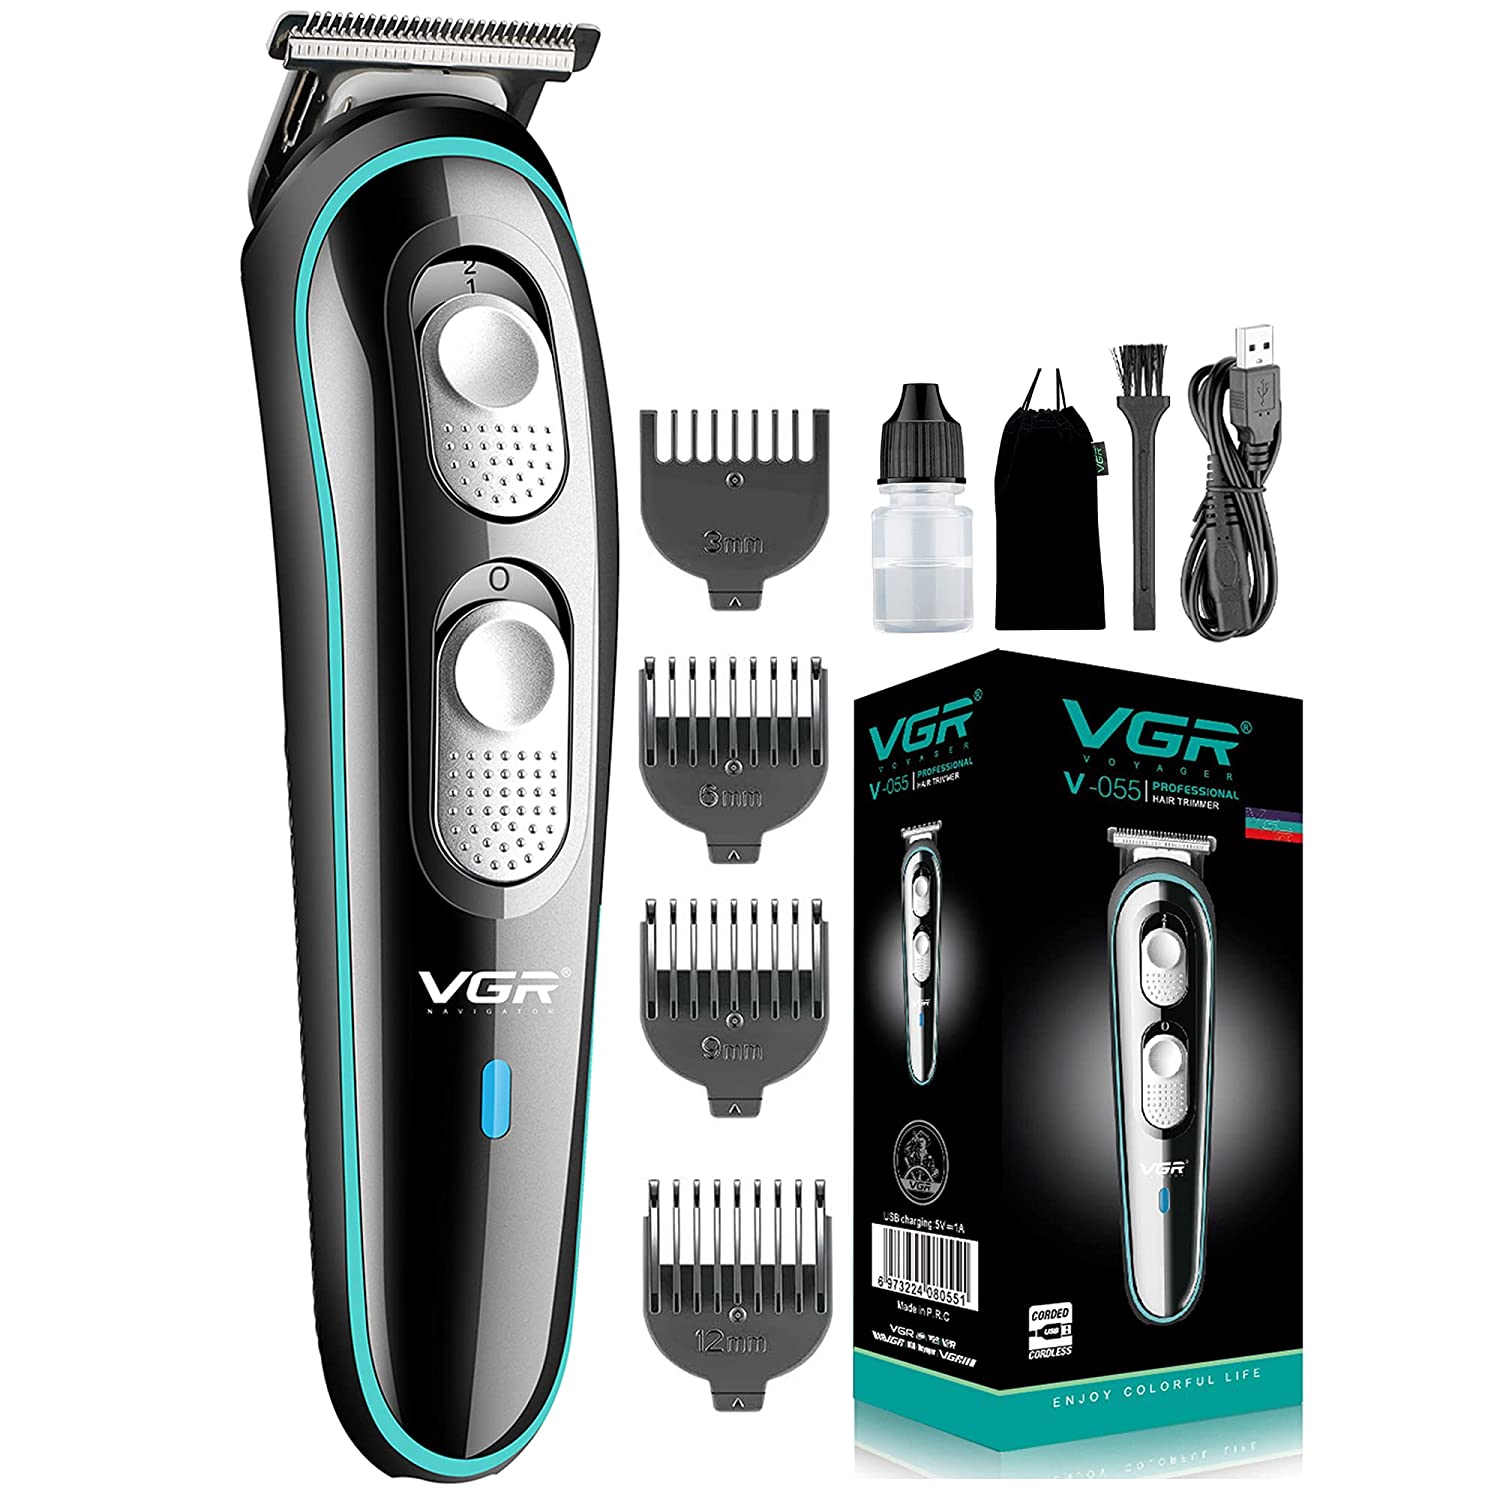 Buy VGR V-055 Professional Cordless Rechargeable Beard Trimmer Clippers for Men with Guide Combs Brush, Black